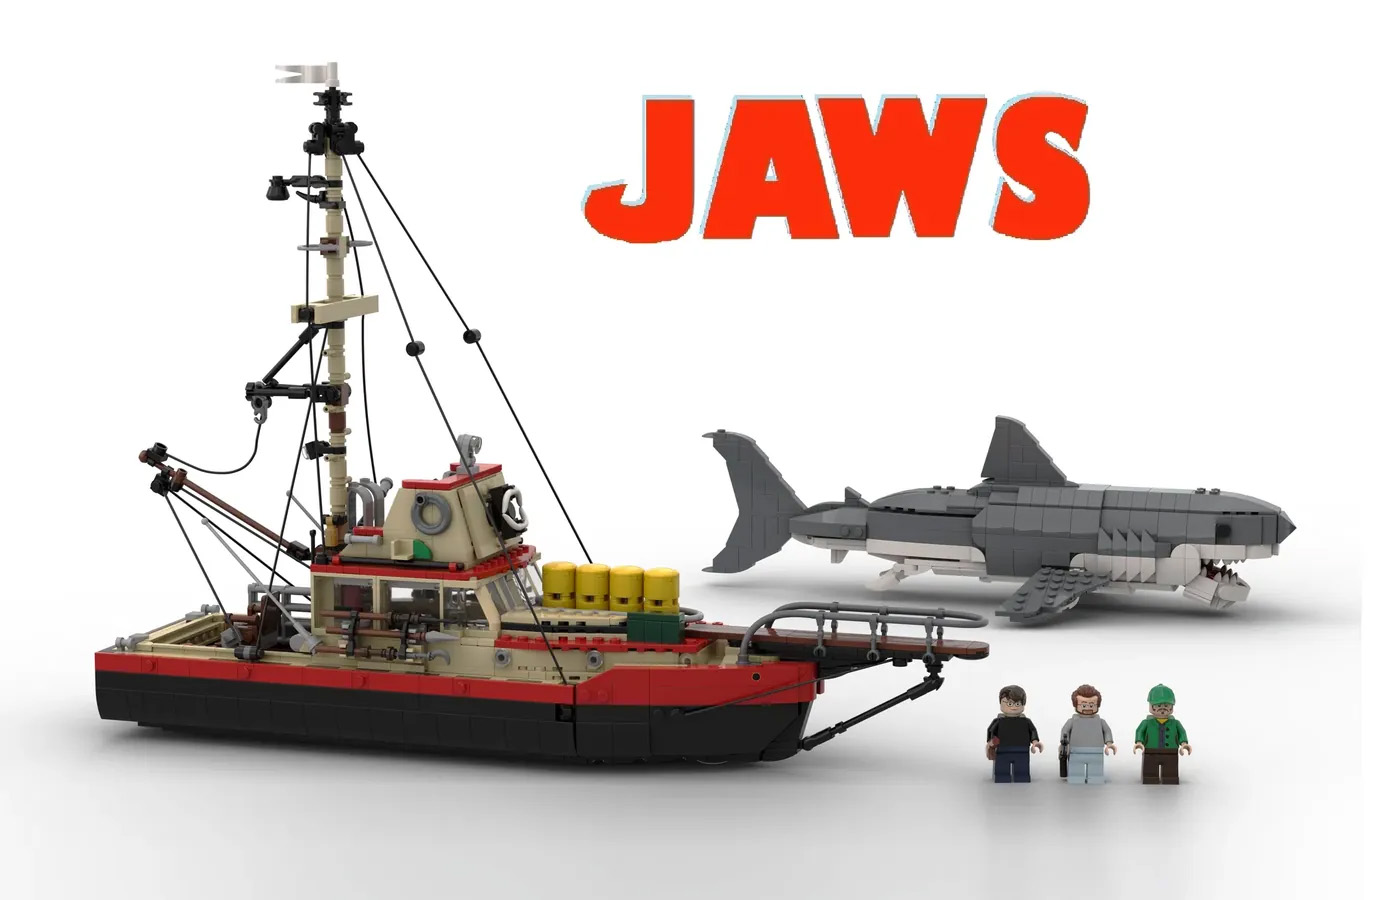 JAWS Achieves 10K Support on LEGO IDEAS